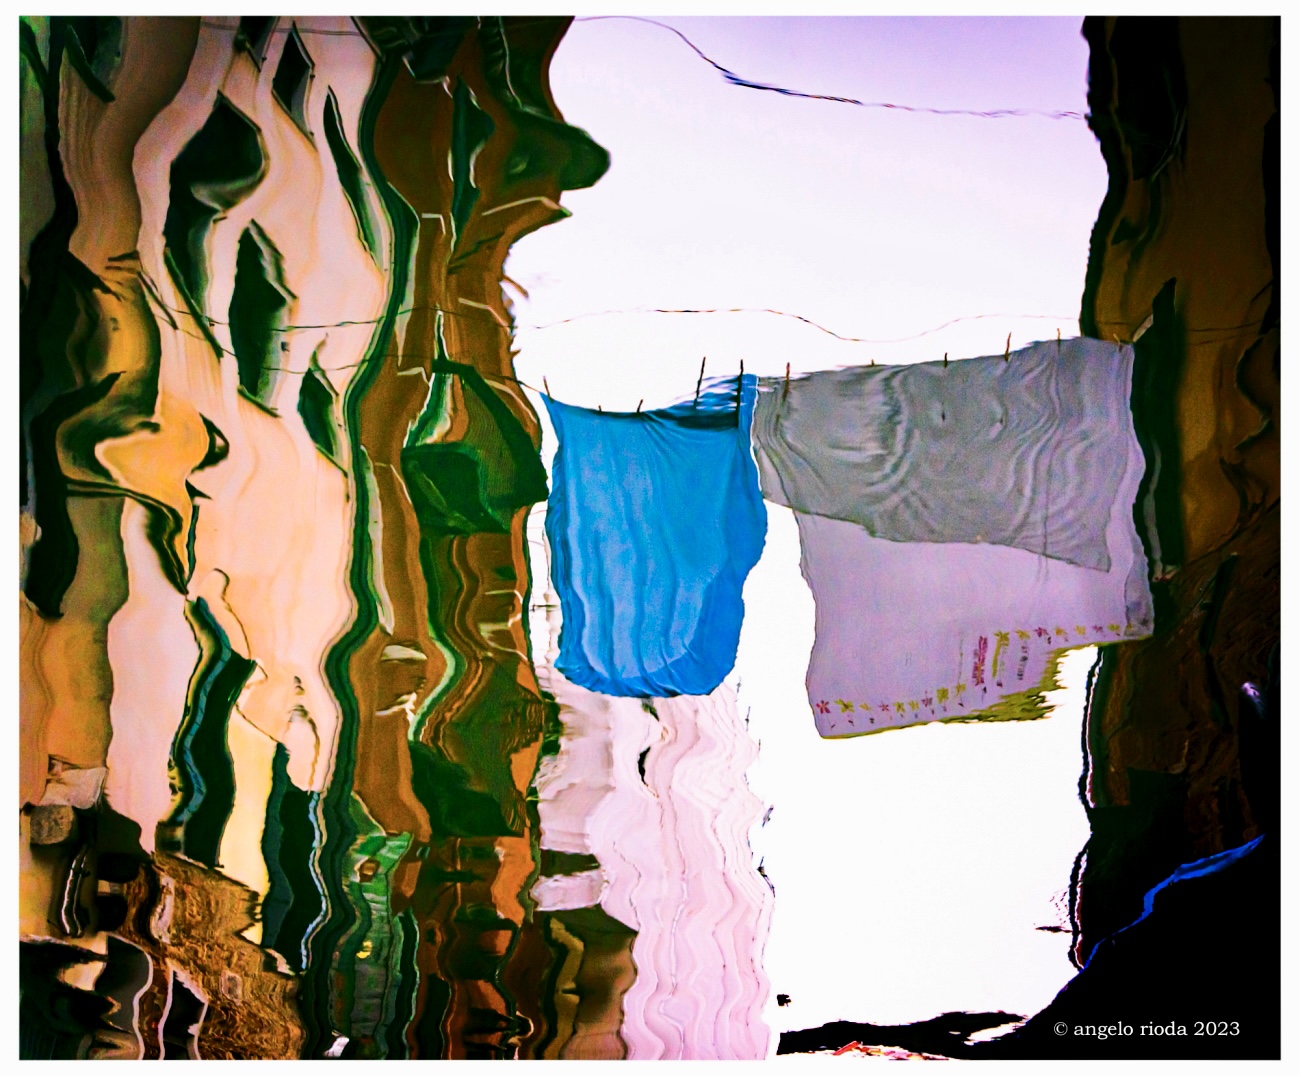 Reflection of hanging clothes (Venice)...